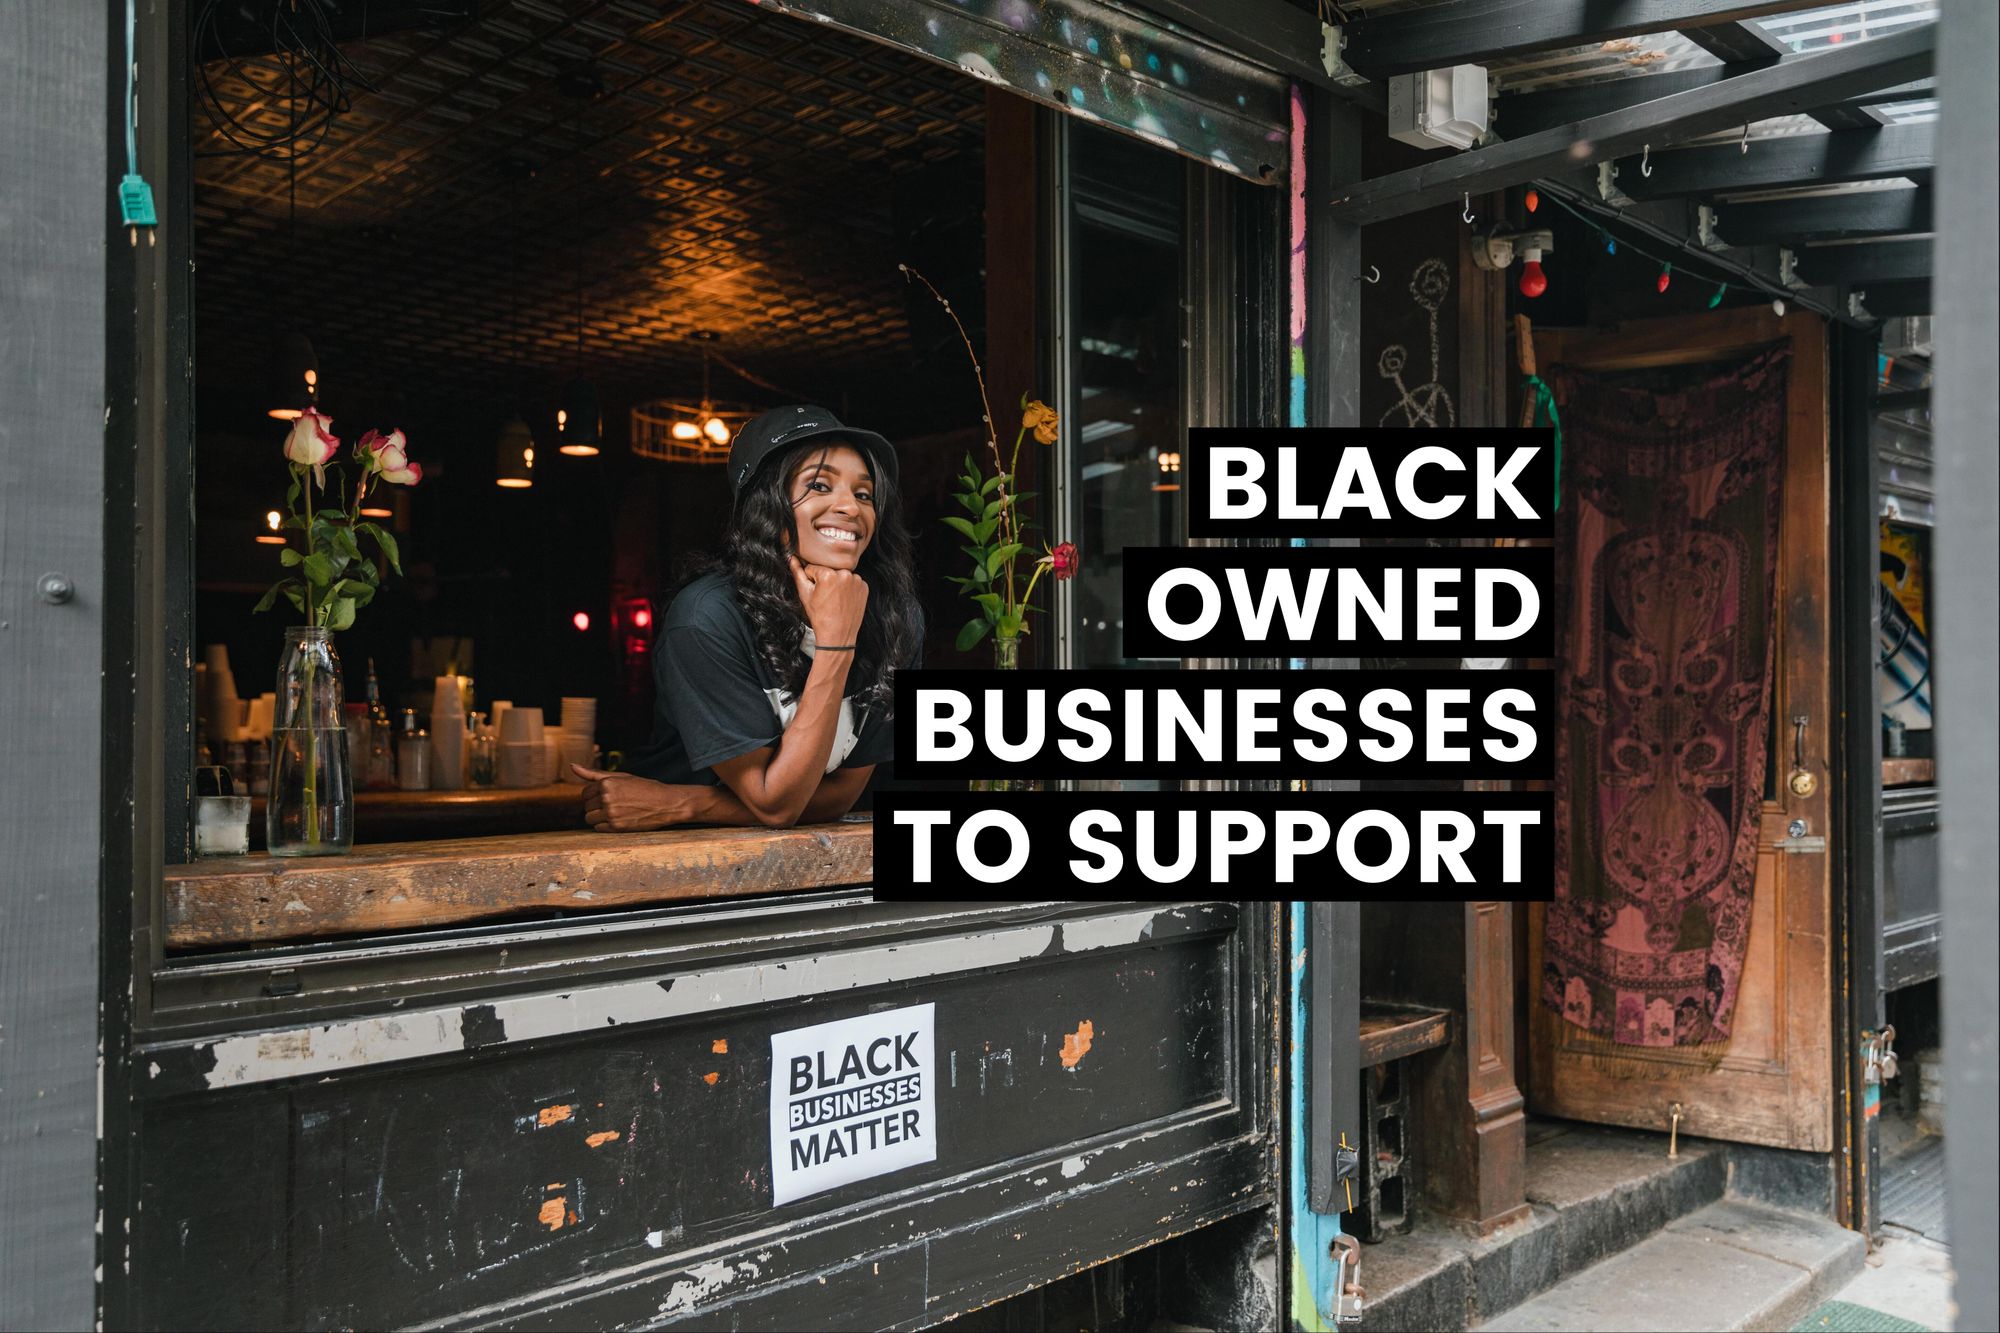 22 Black-Owned Businesses to Support in 2022